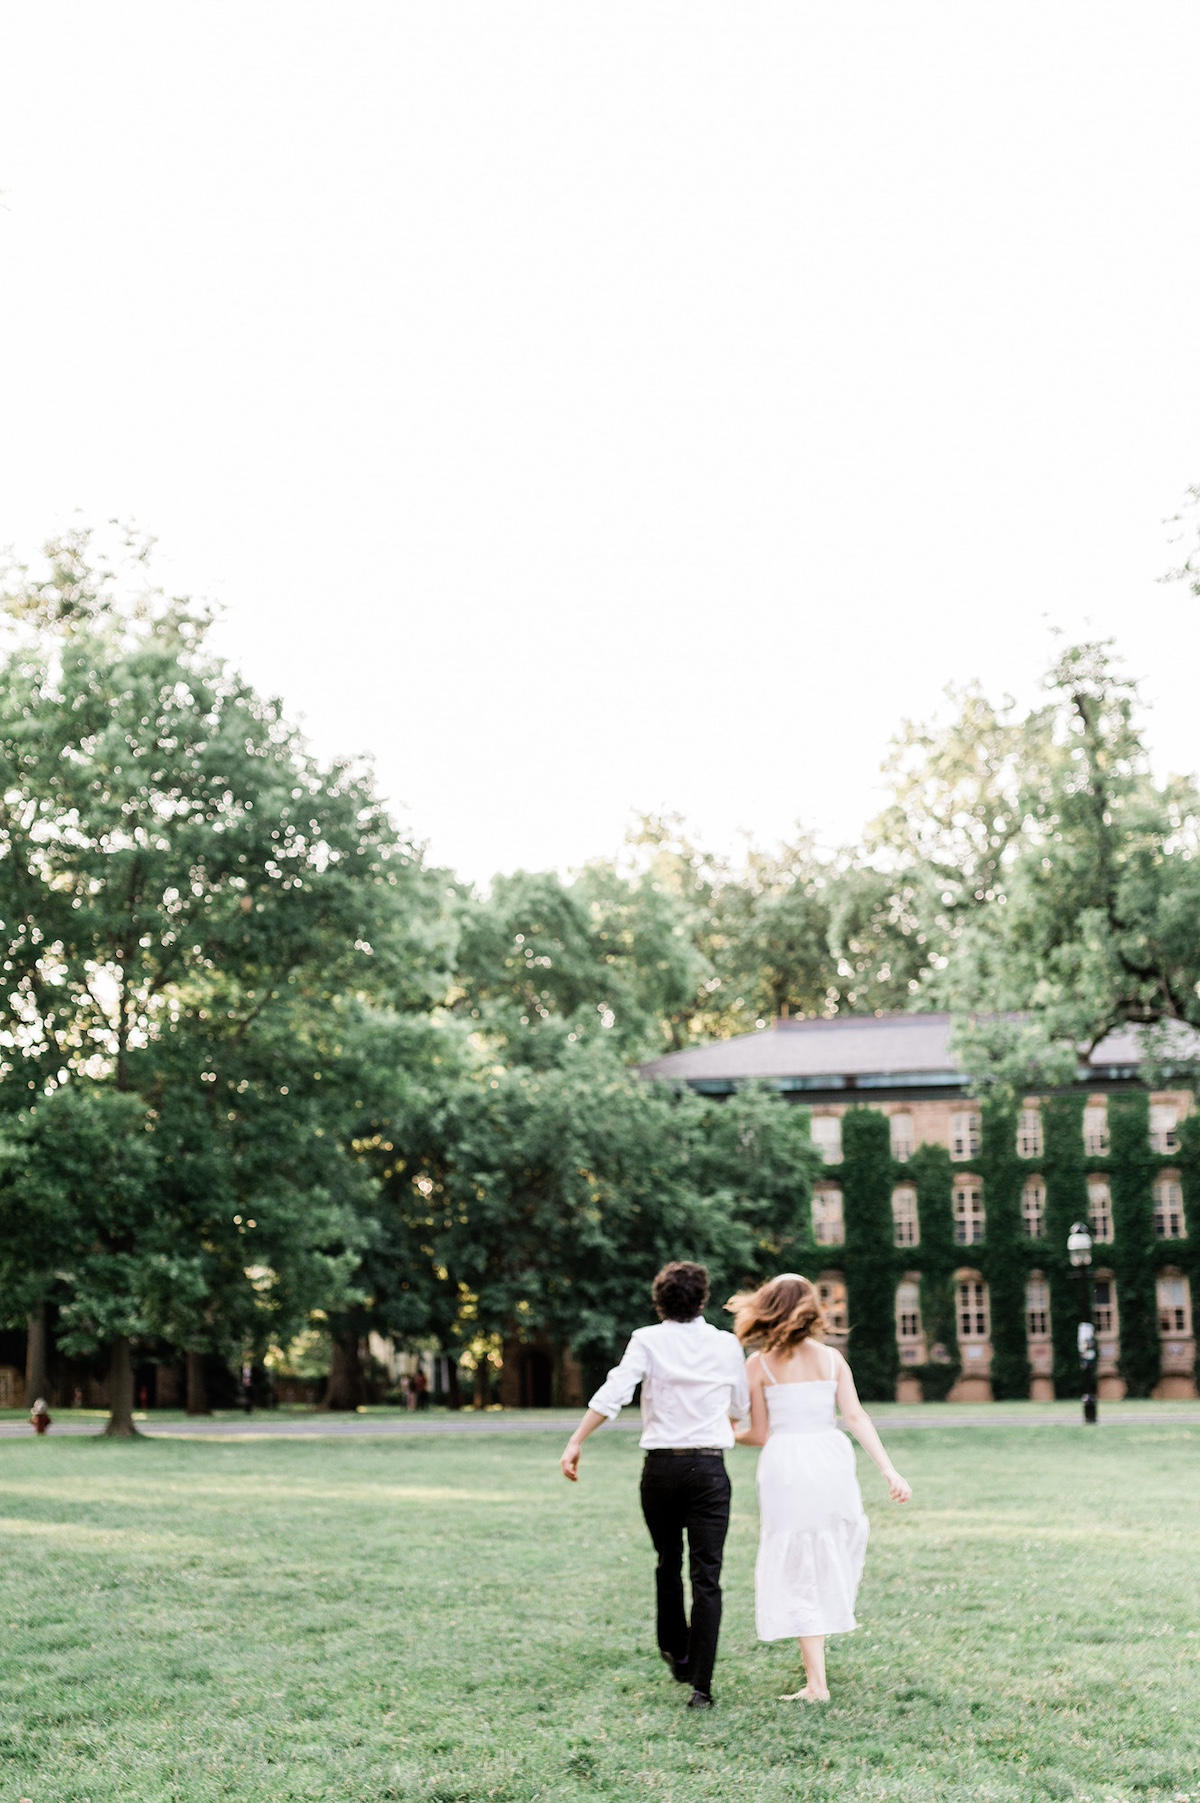 The Princeton University campus, a picturesque setting that adds romance to Page and Christopher's love story.